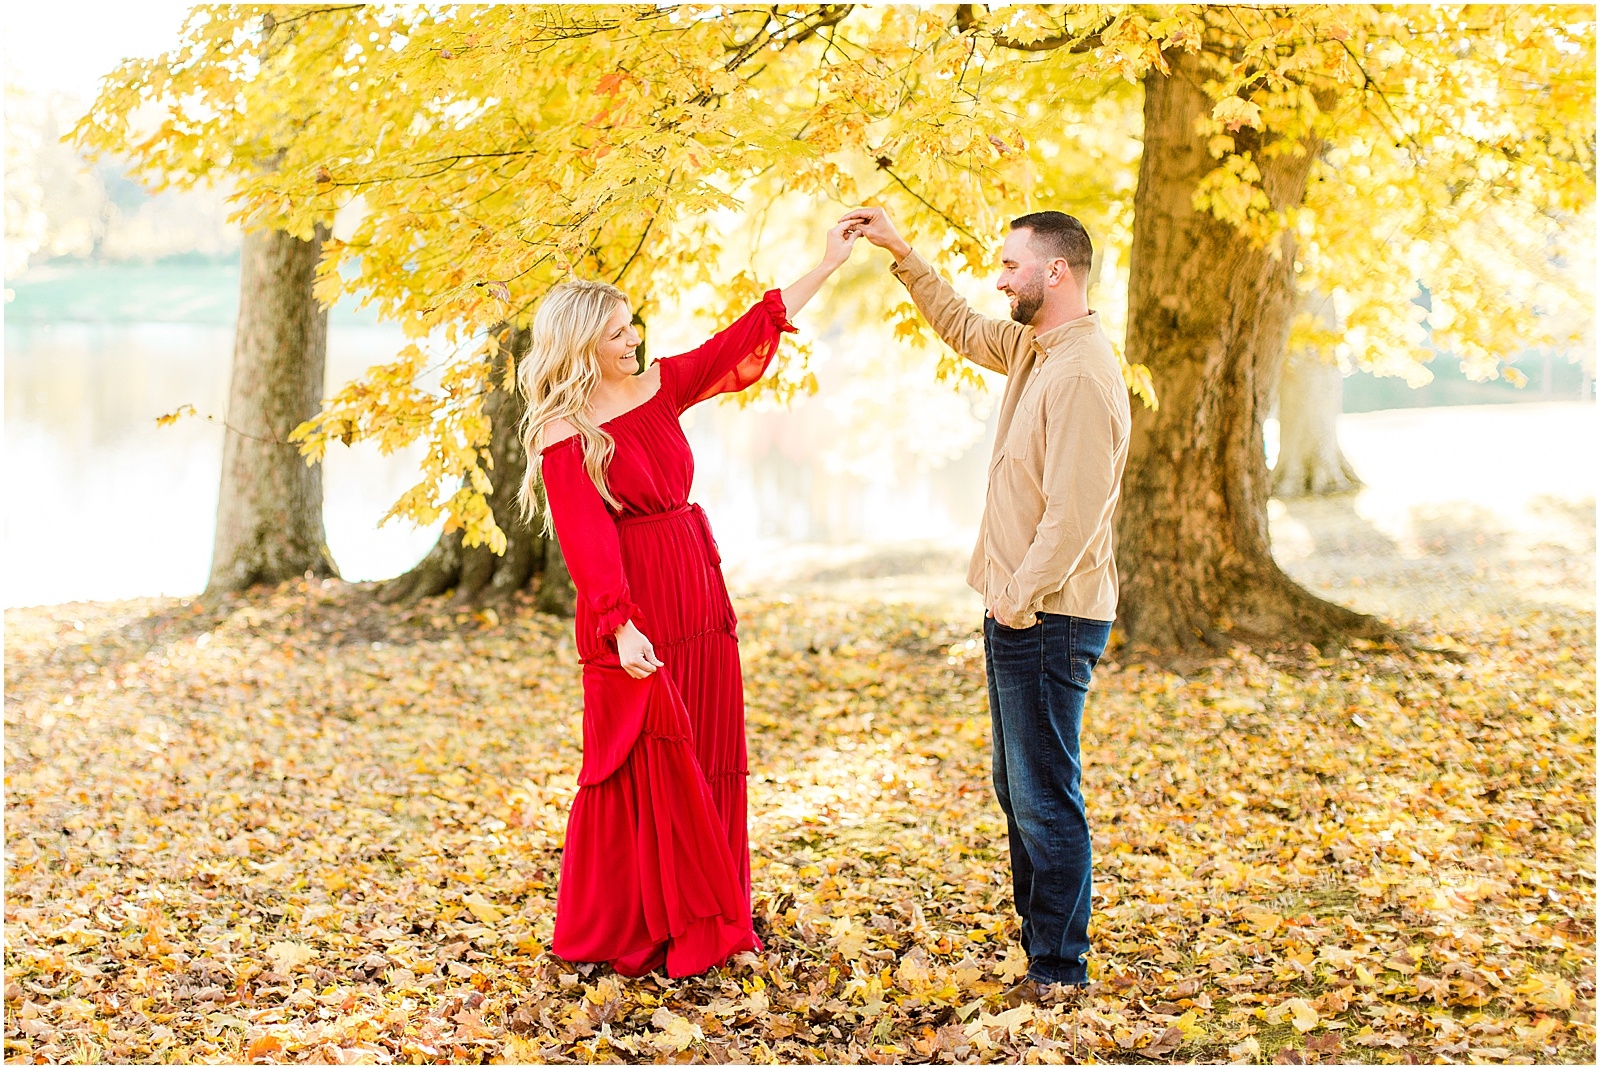 A Southern Indiana Engagement Session | Charleston and Erin | Bret and Brandie Photography031.jpg